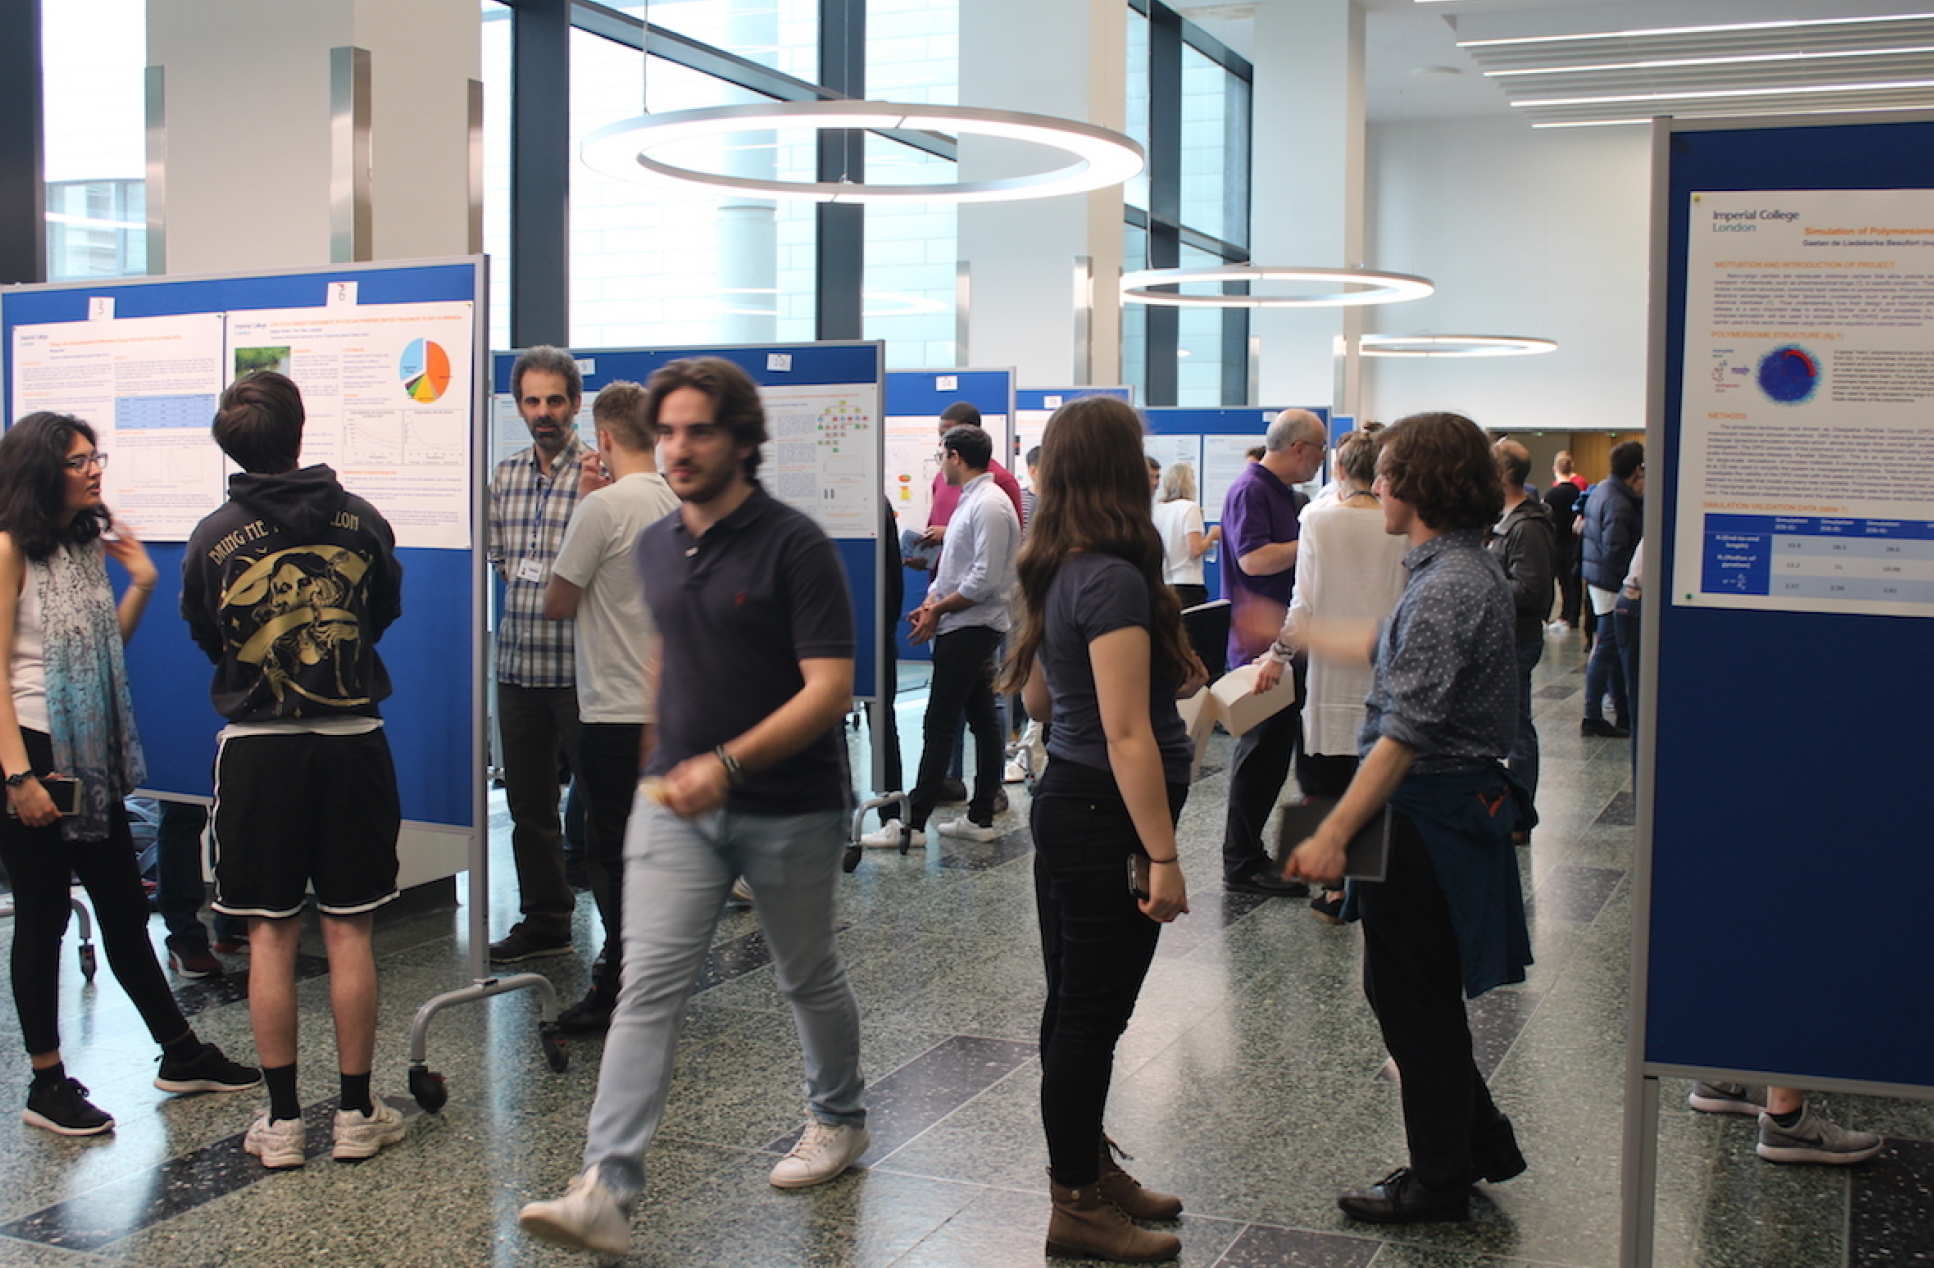 Fourth year poster exhibition